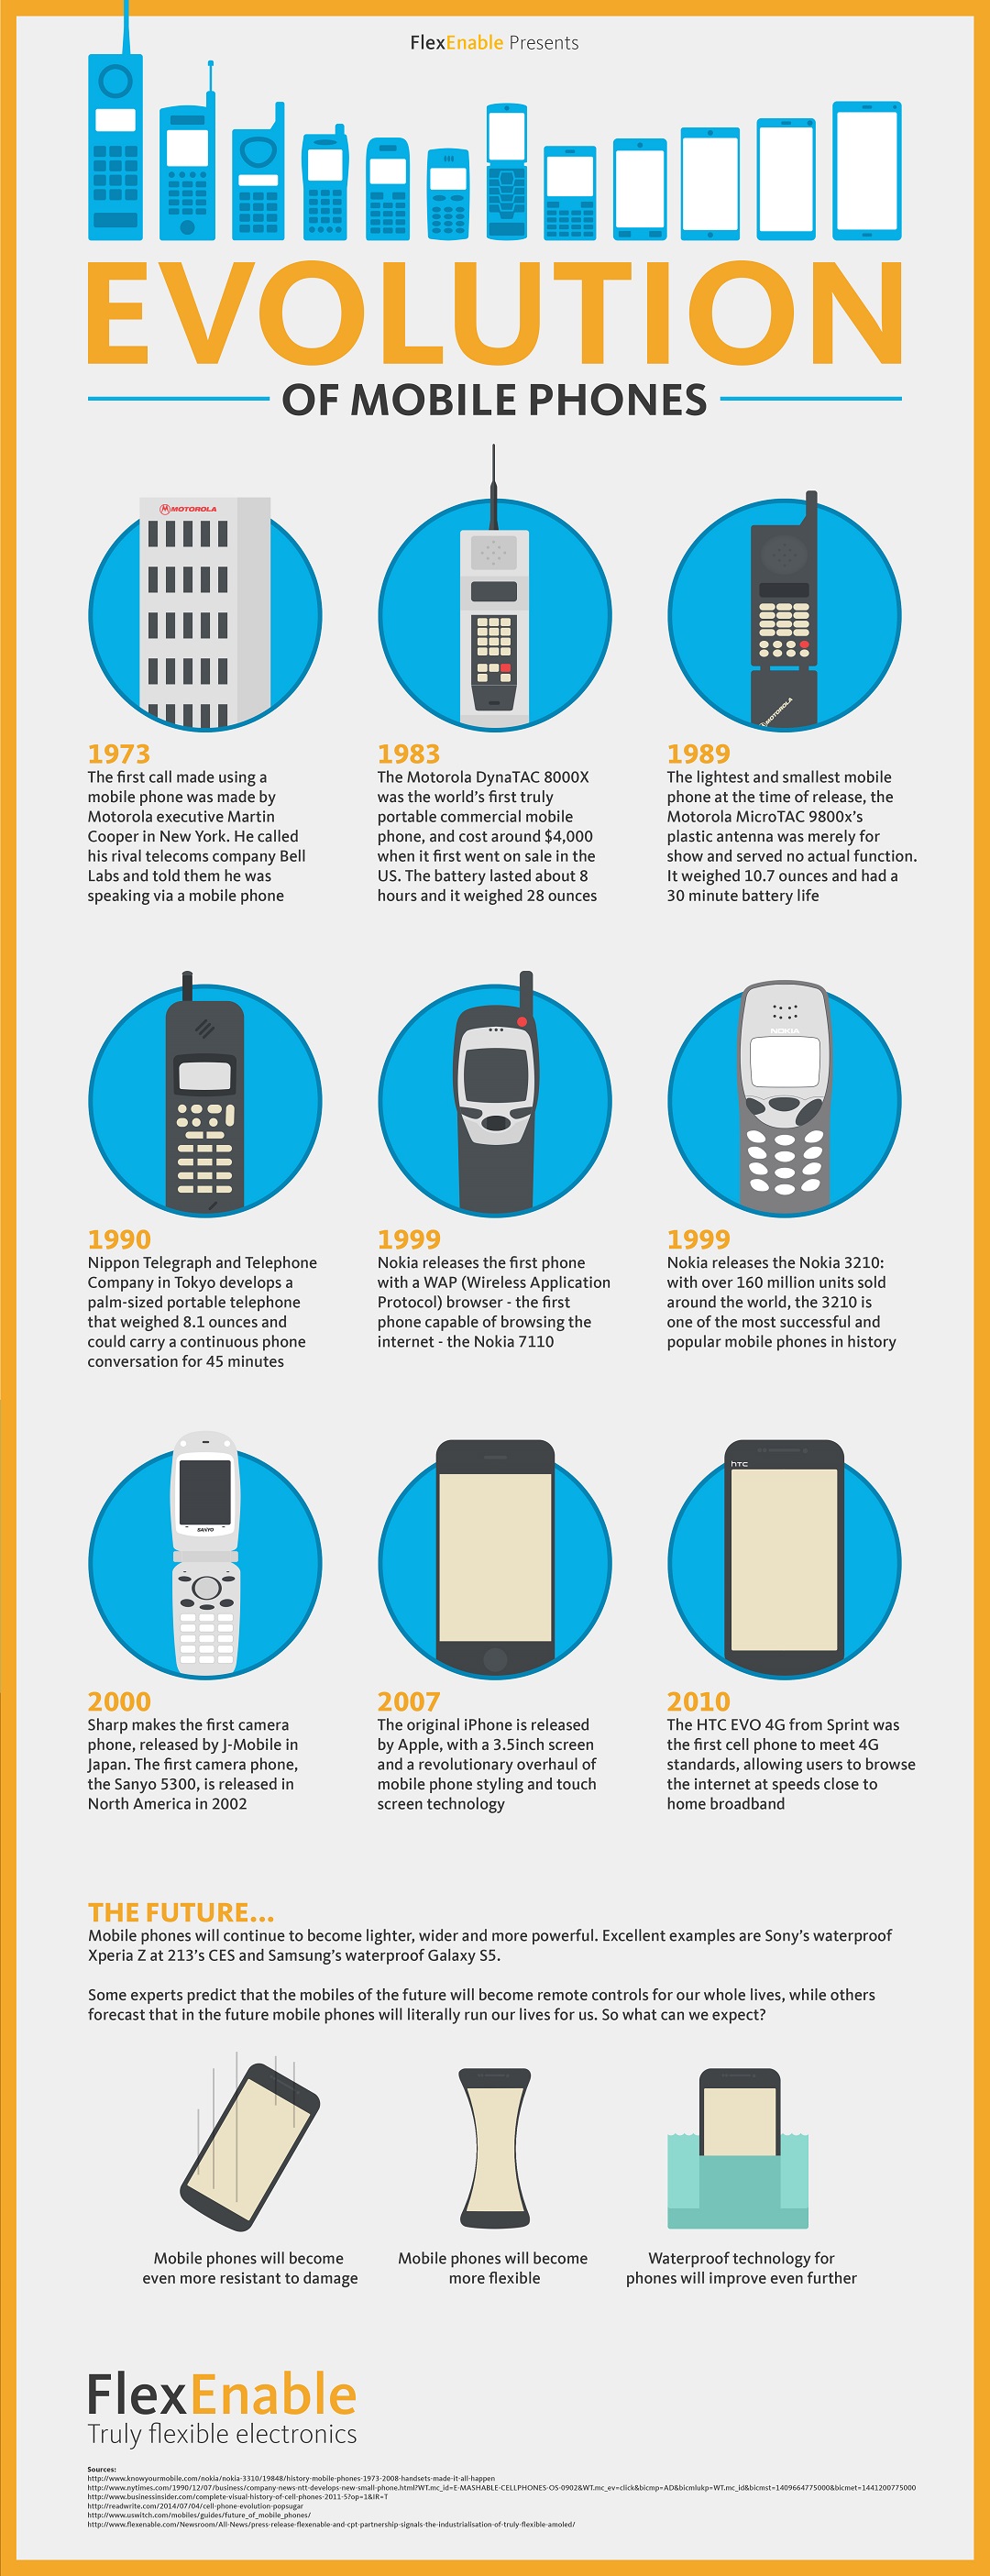 The Evolution of Mobile Phone